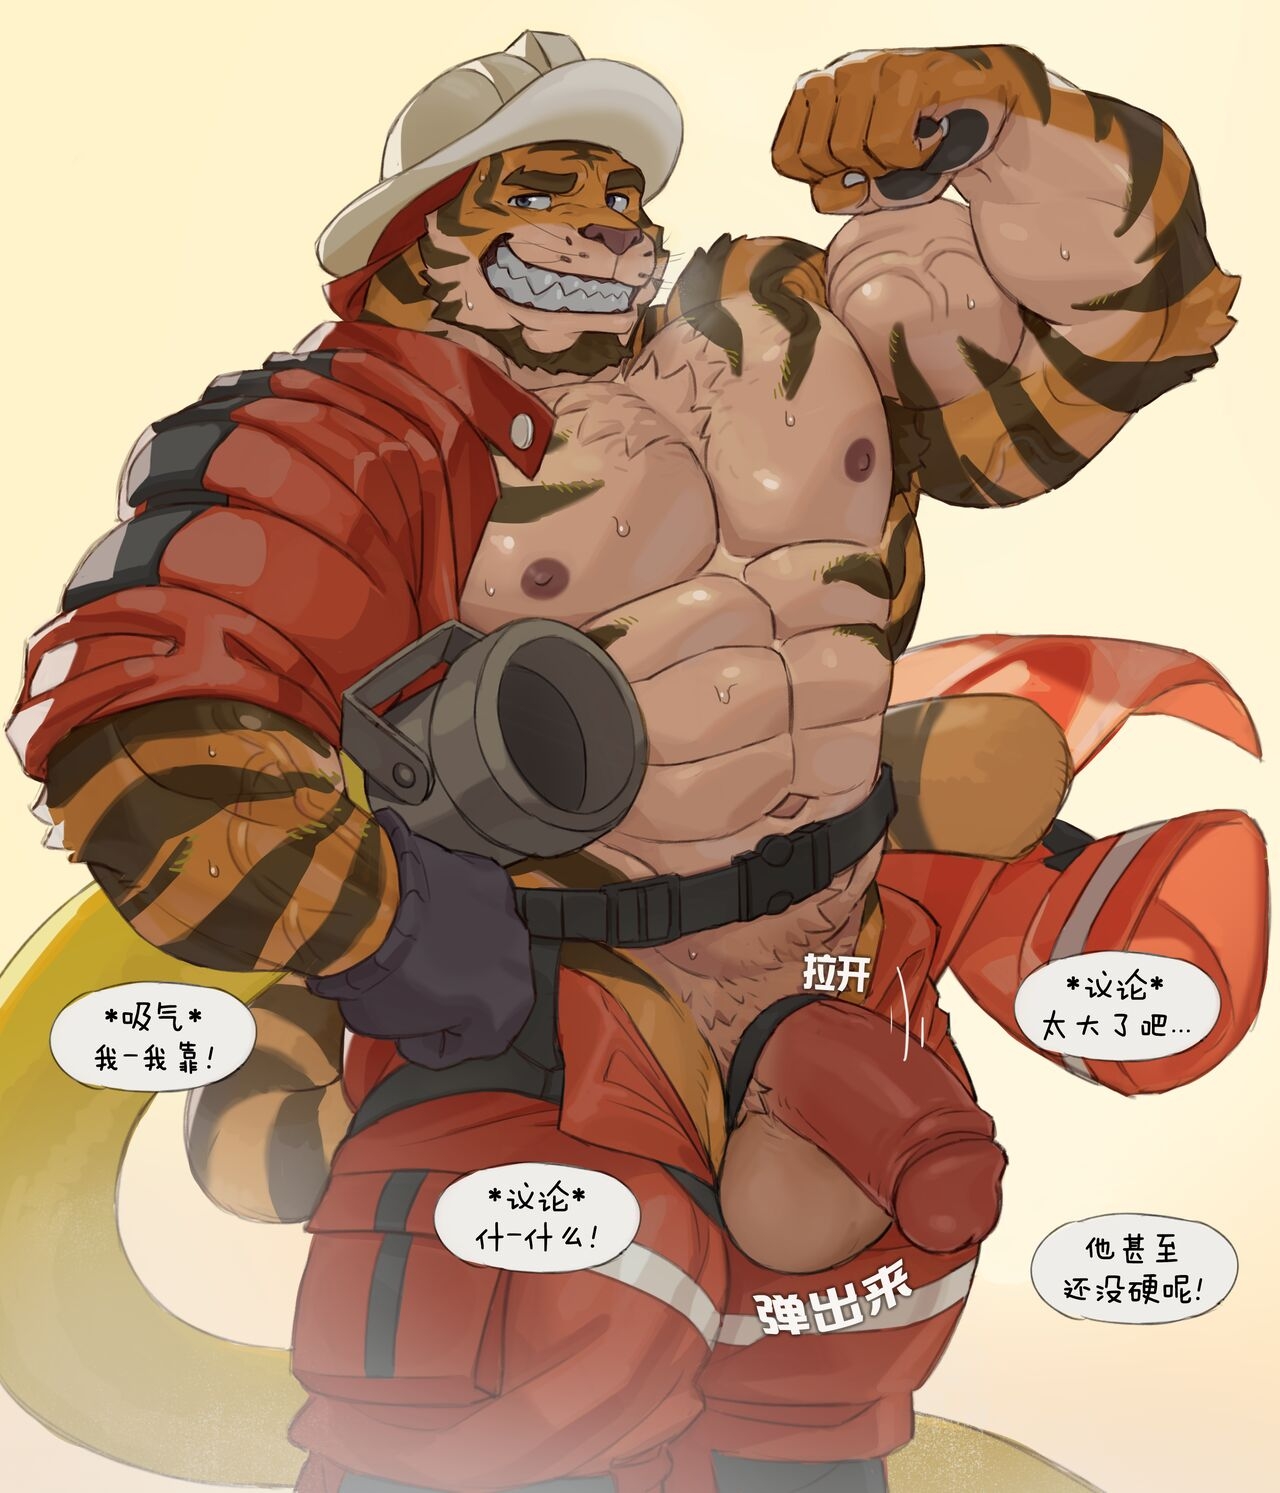 [Imatoart] Tiger Fire Chief's Training Session | 老虎消防队长的训练时间! [Chinese][Translated by Chrome Heart Tags] 5